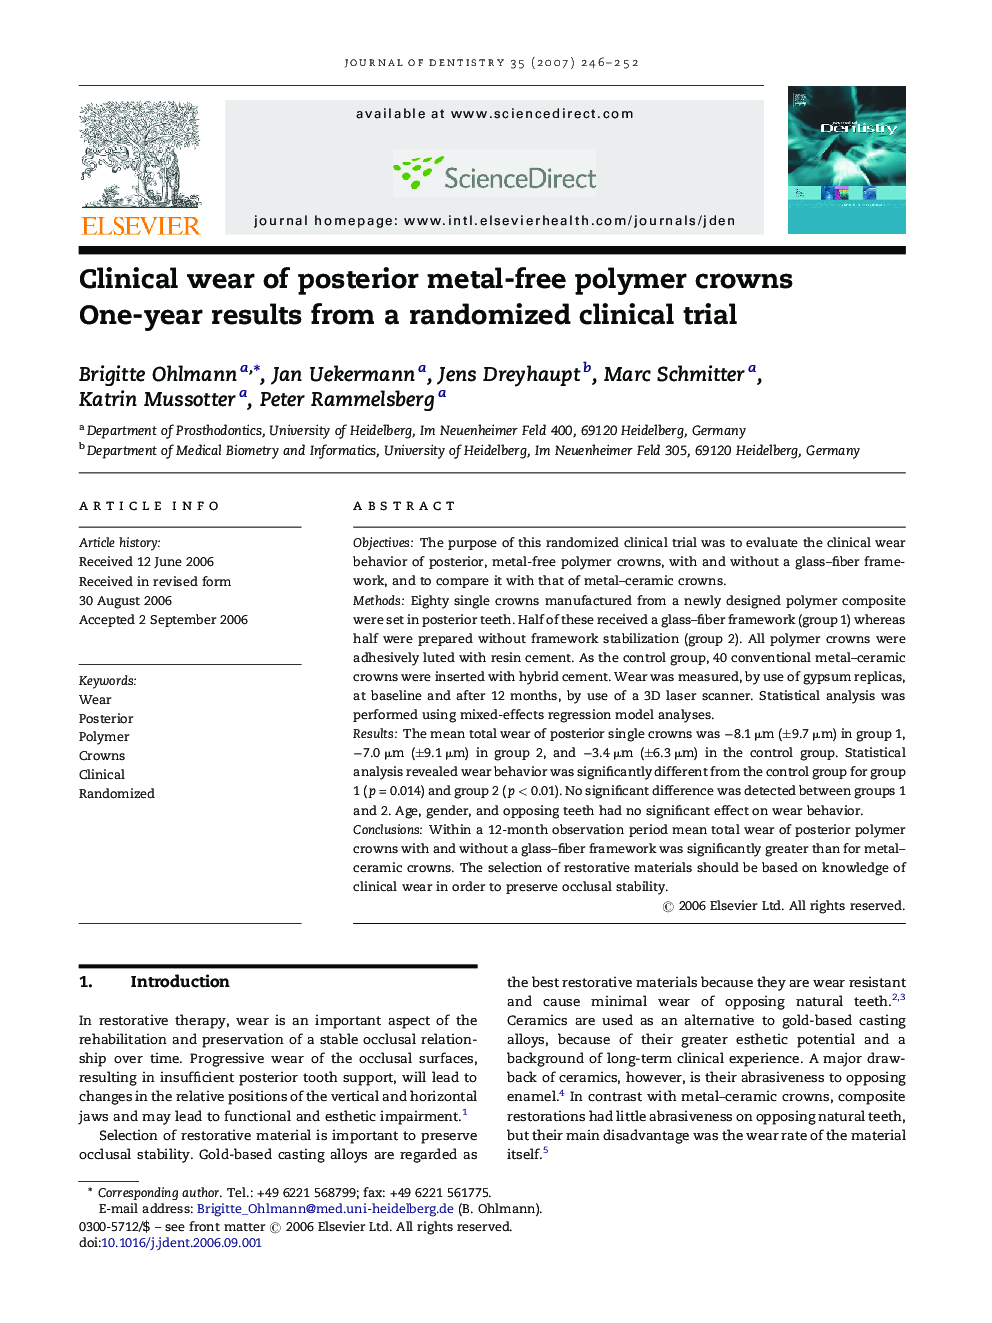 Clinical wear of posterior metal-free polymer crowns: One-year results from a randomized clinical trial